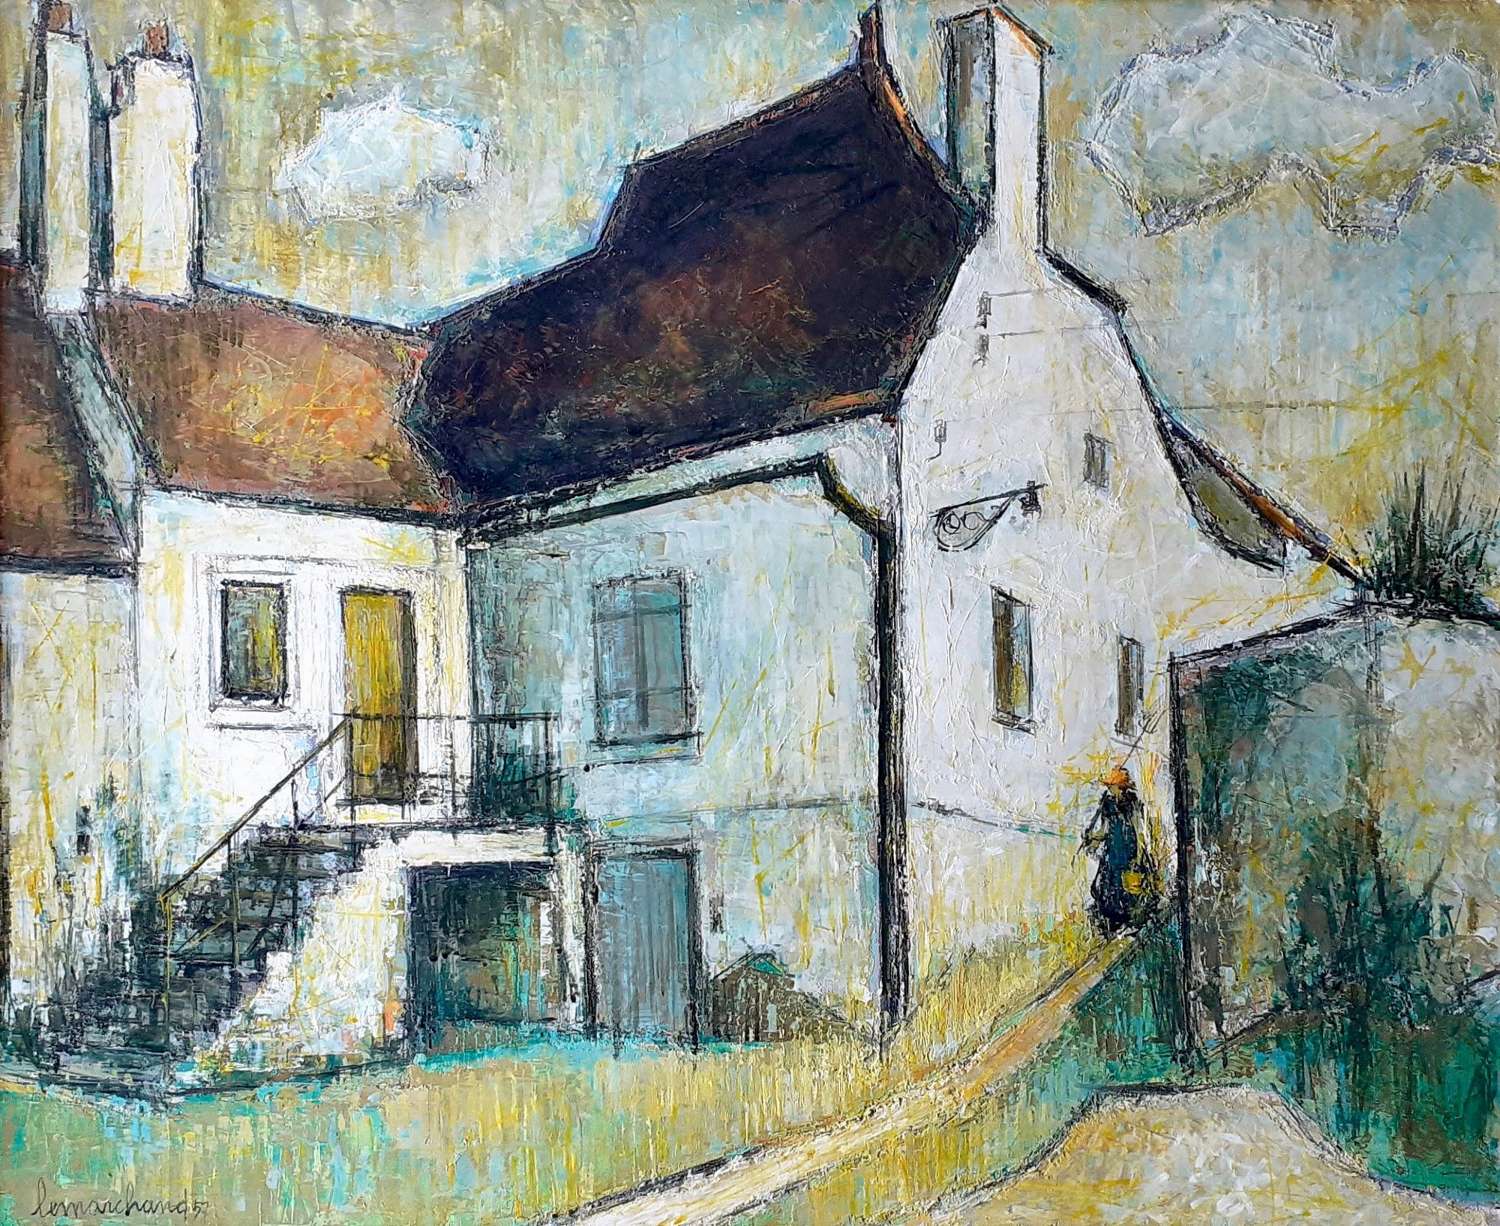 Lemarchand: Gardening At The Old Farmhouse Large Abstracted Oil